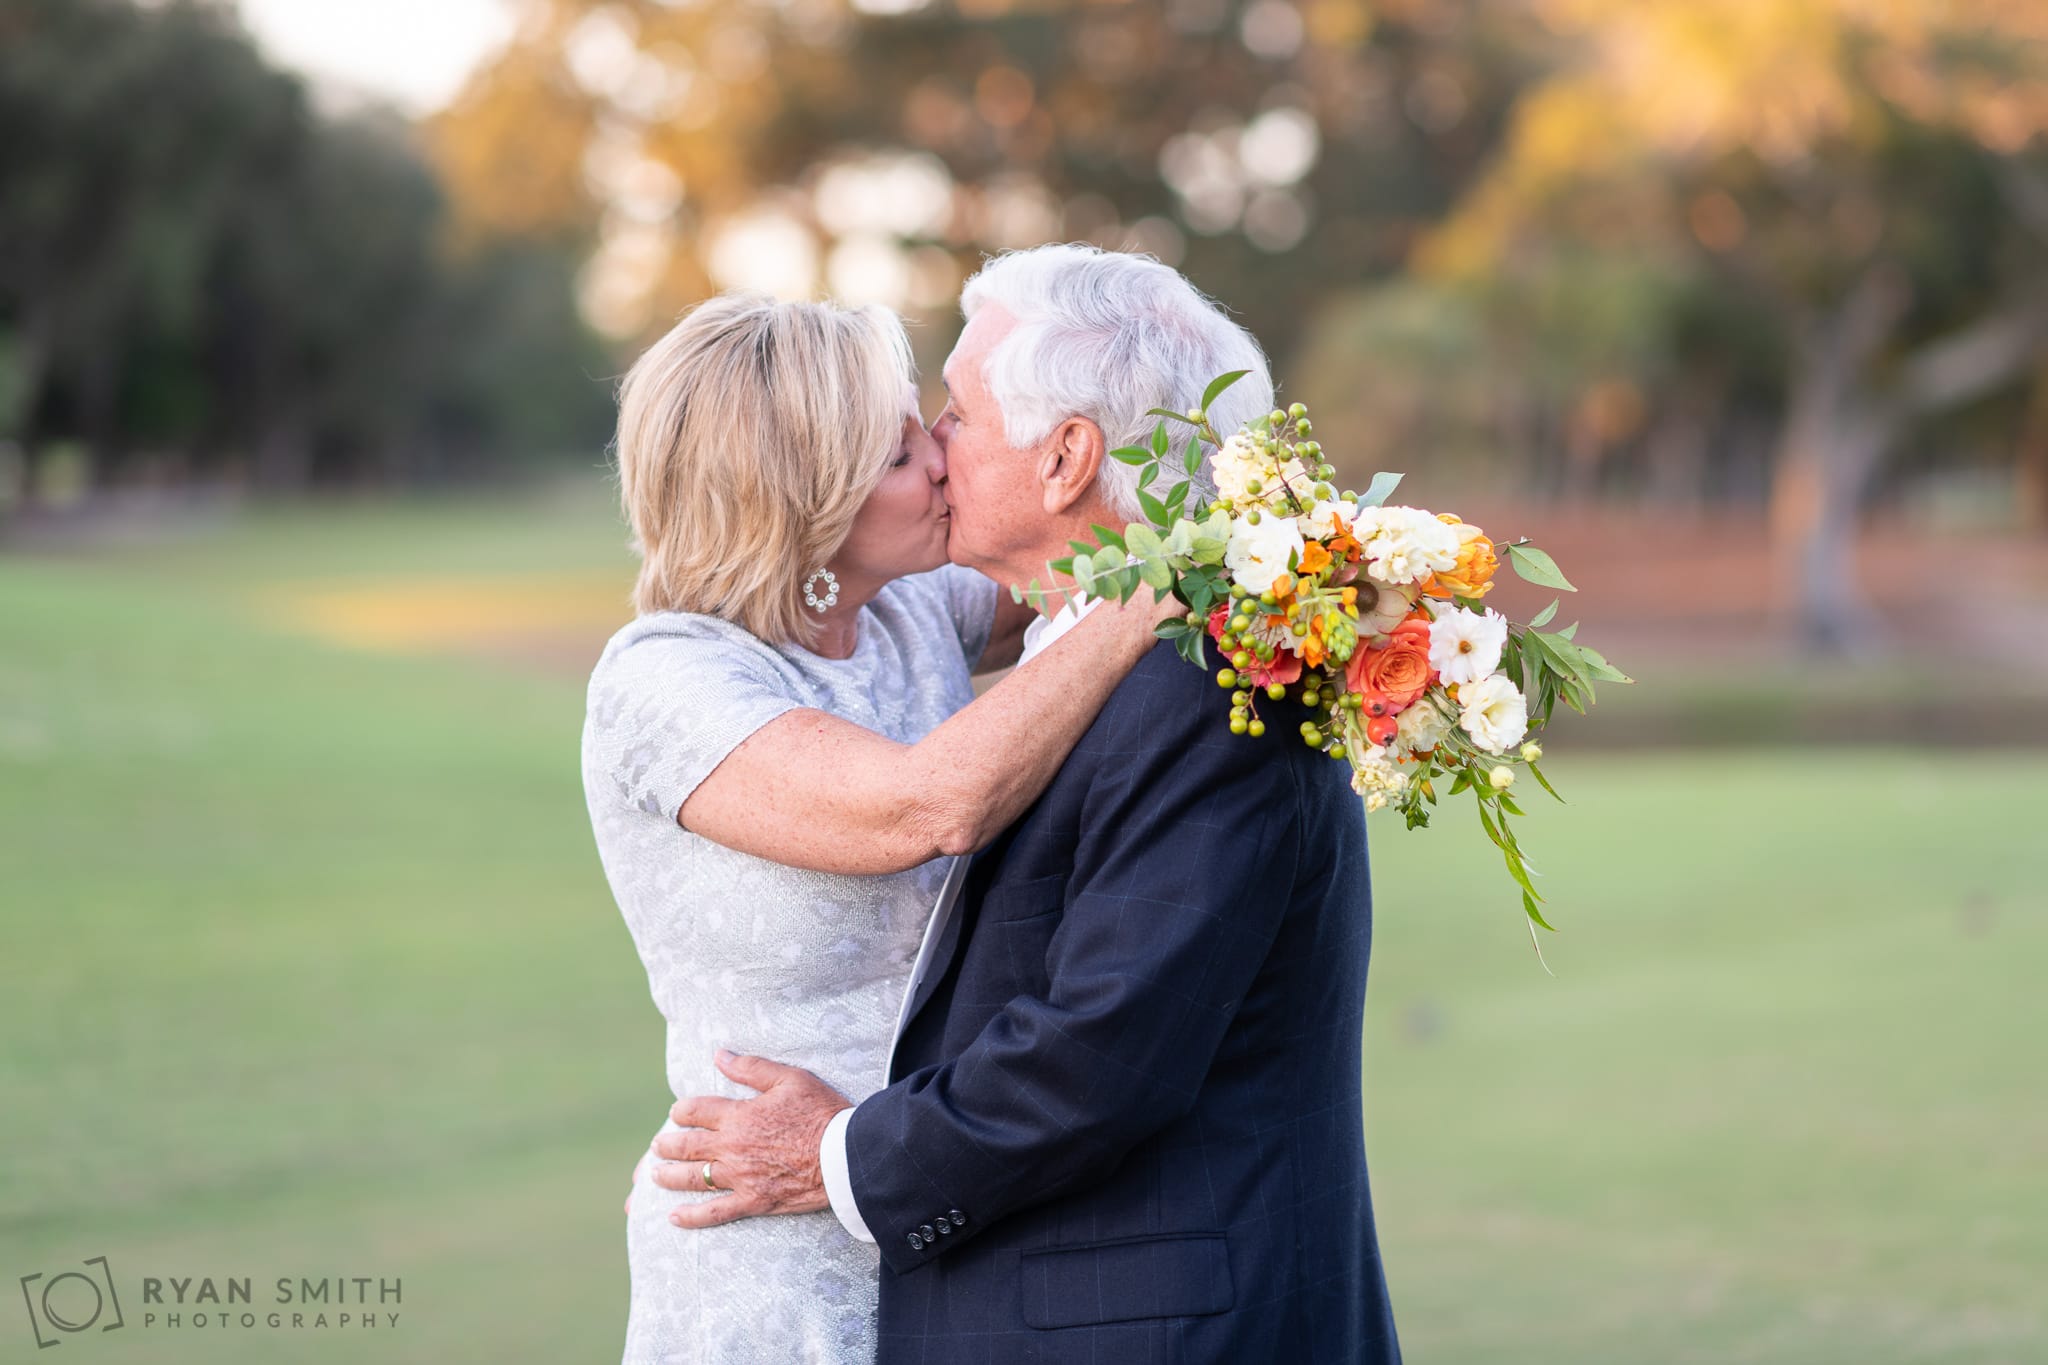 Kiss with bride's arms and flowers around the grooms shoulders - Dunes Golf and Beach Club - Myrtle Beach